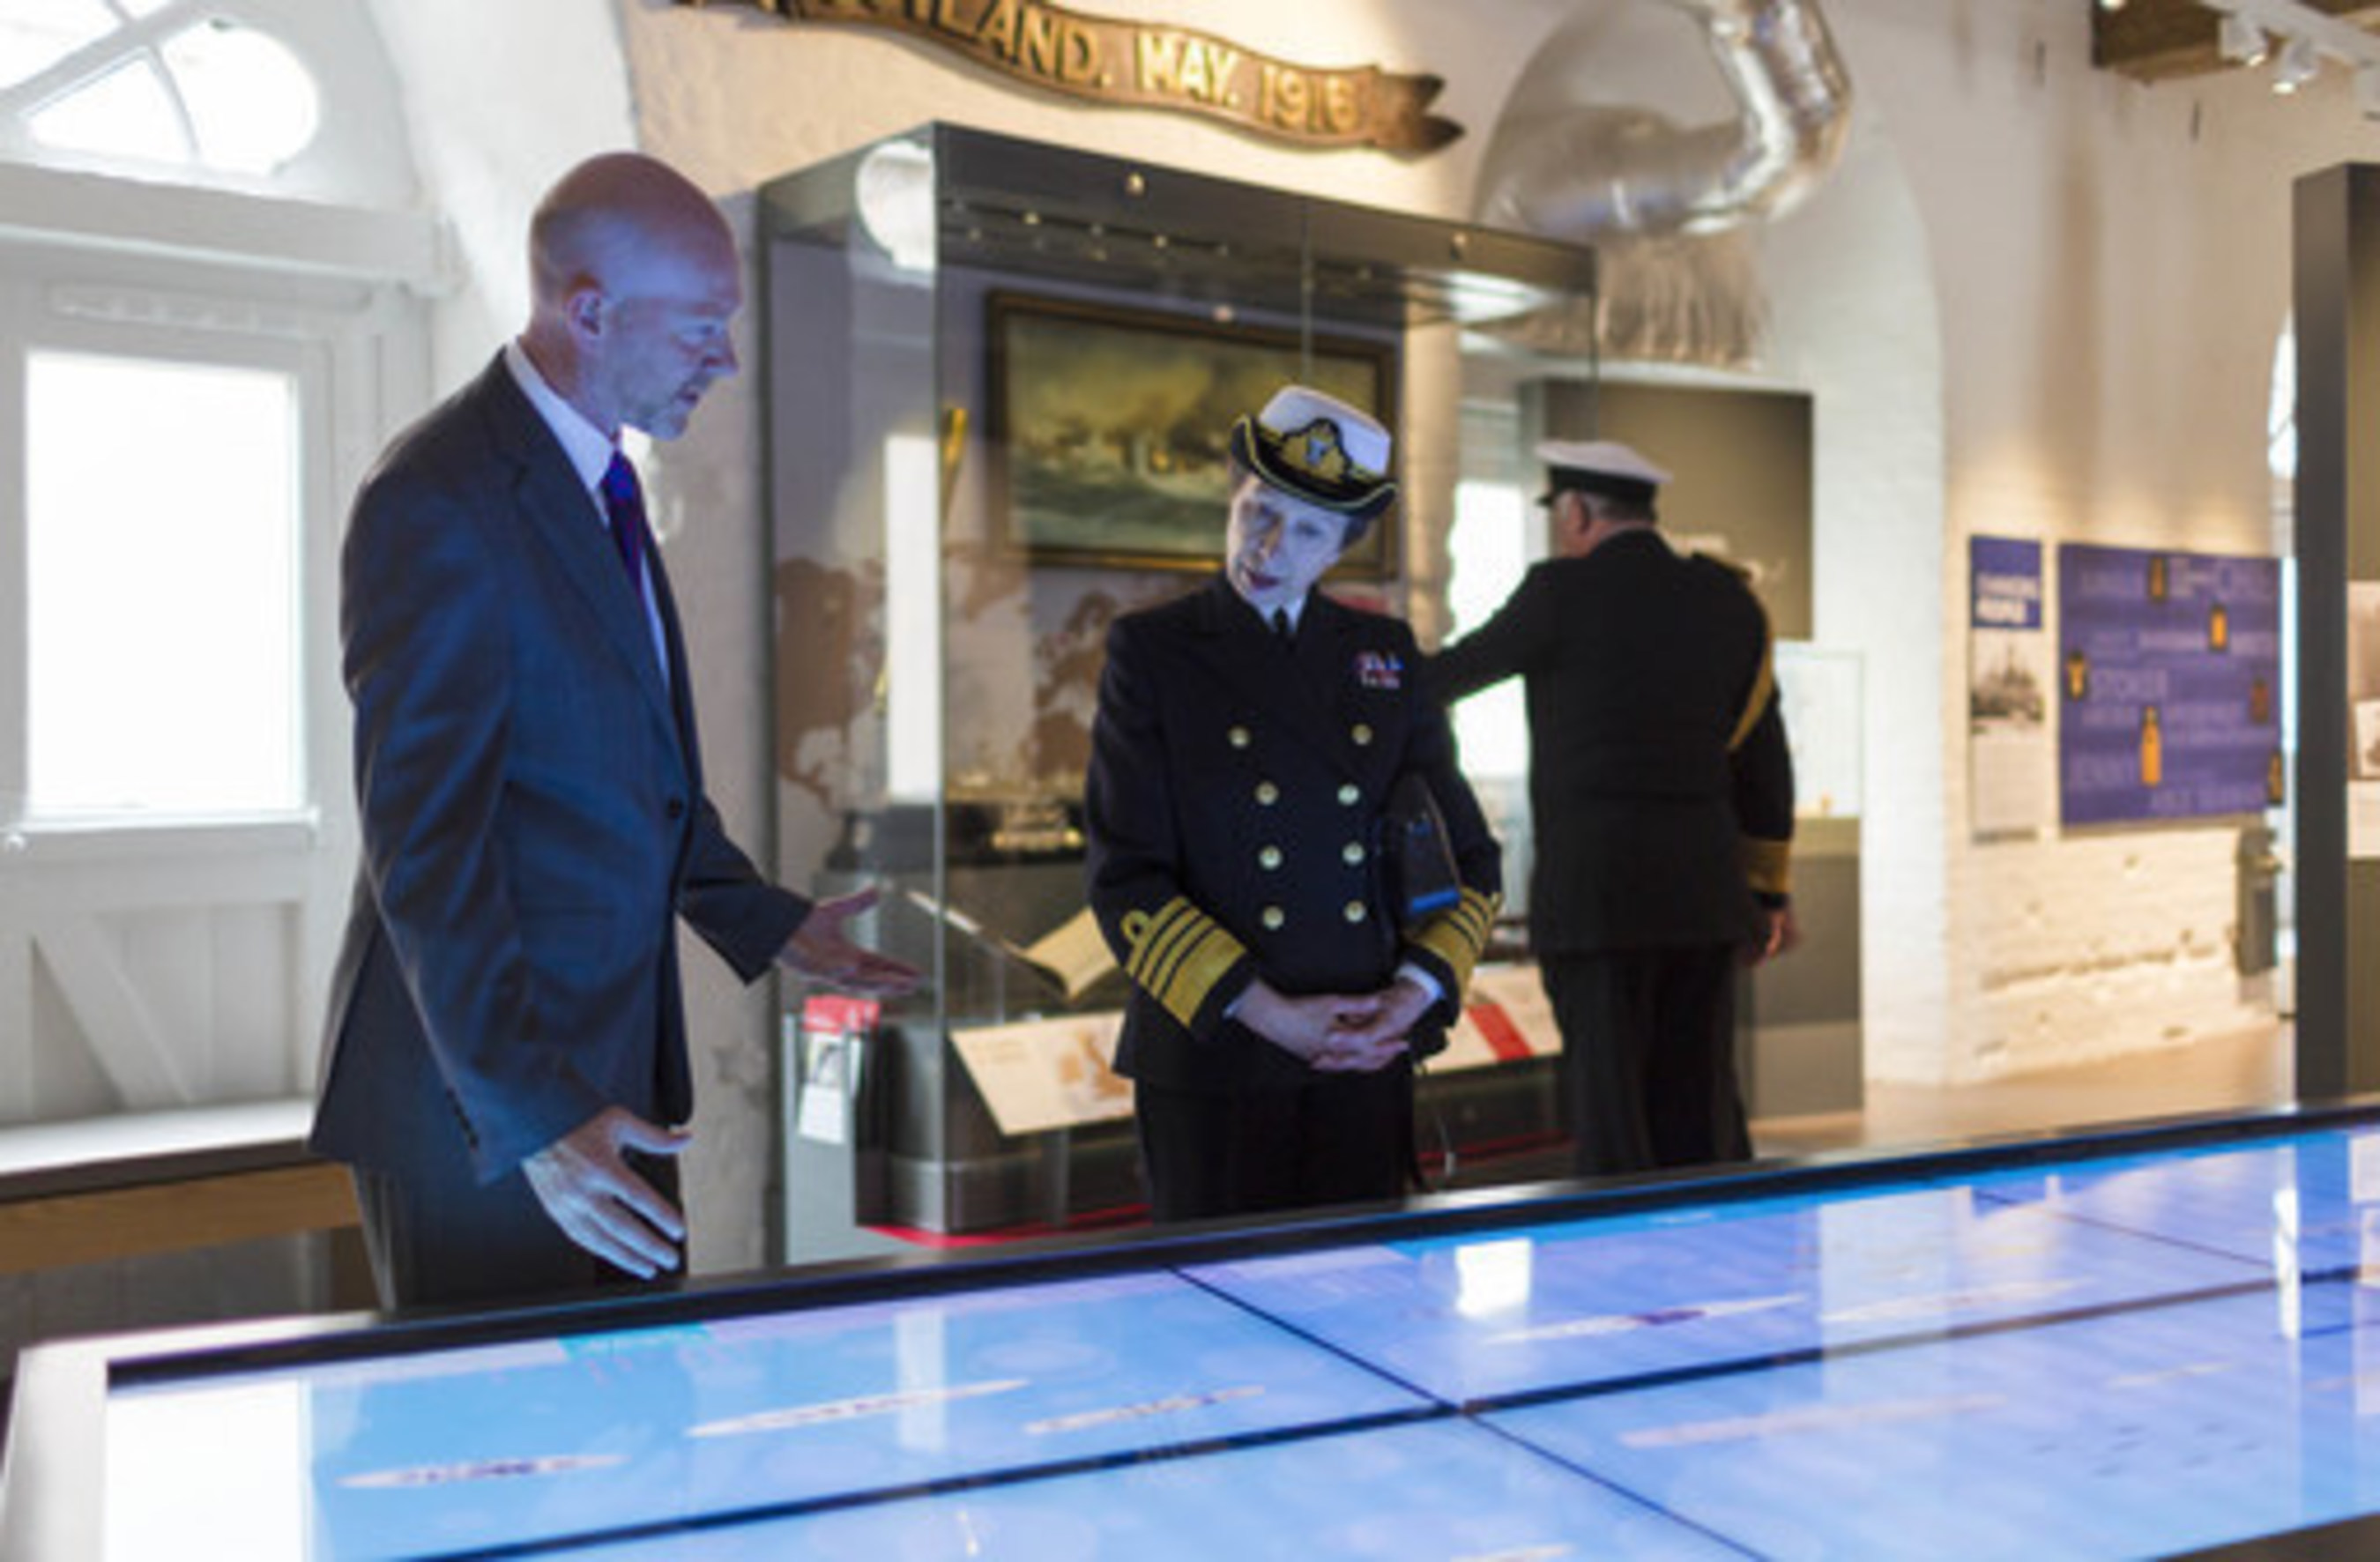 Project Director Matthew Sheldon shows HRH Princess Anne interactive HMS timeline at the National Museum of the Royal Navy.